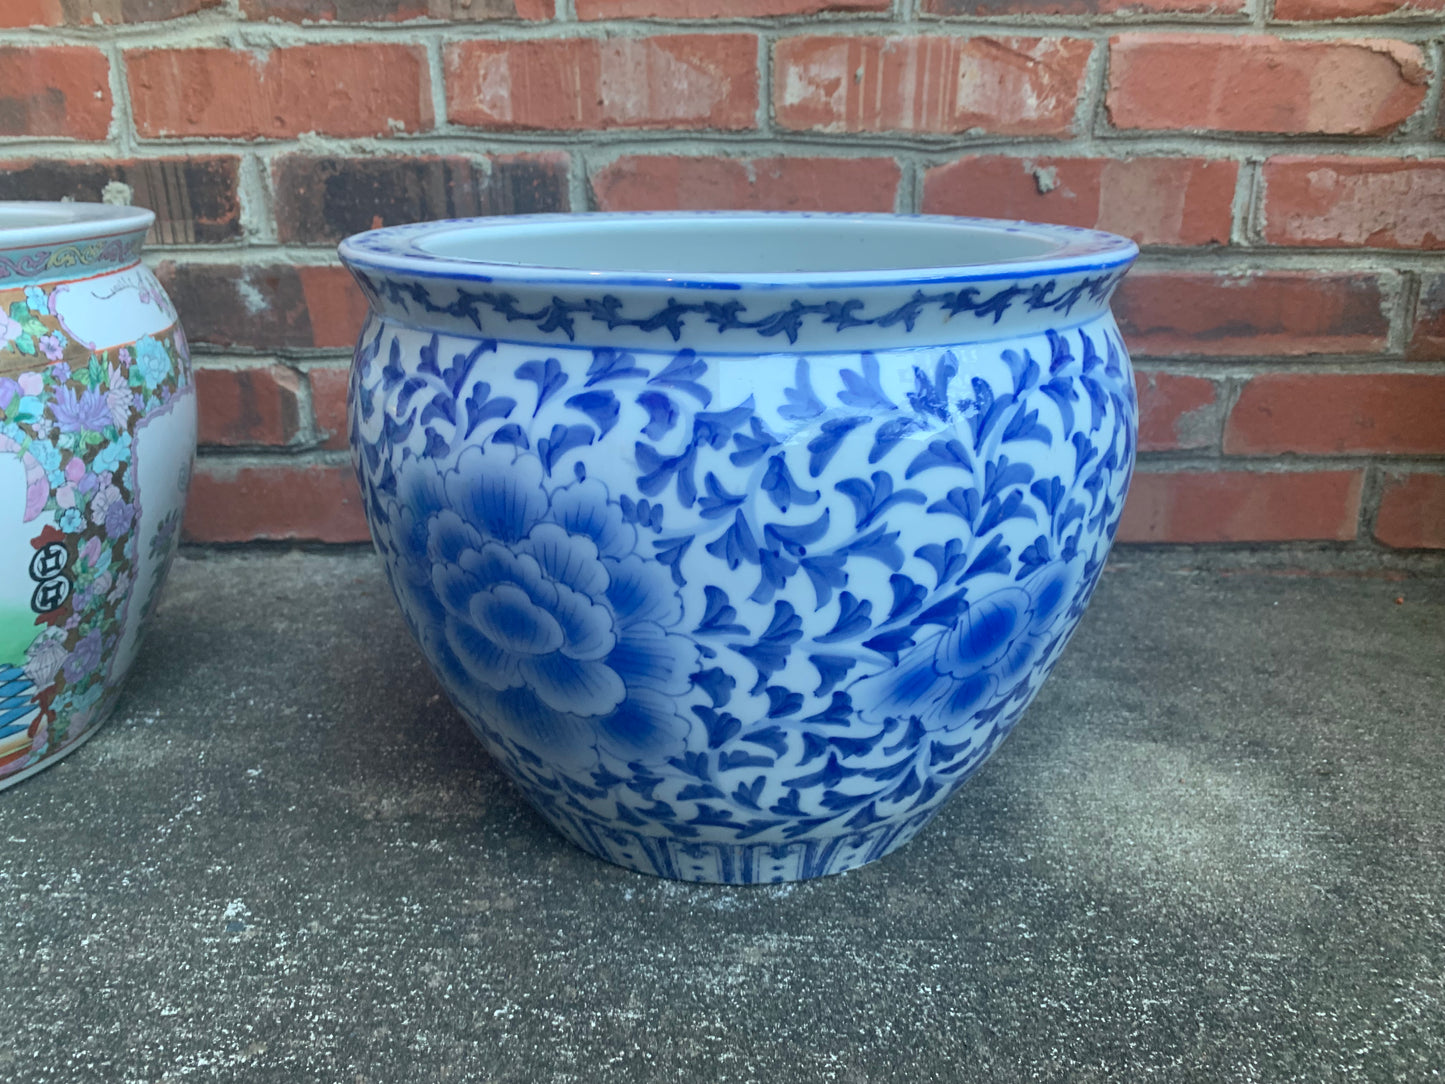 Beautiful Large blue and white fishbowl planter with flowers- Excellent condition!